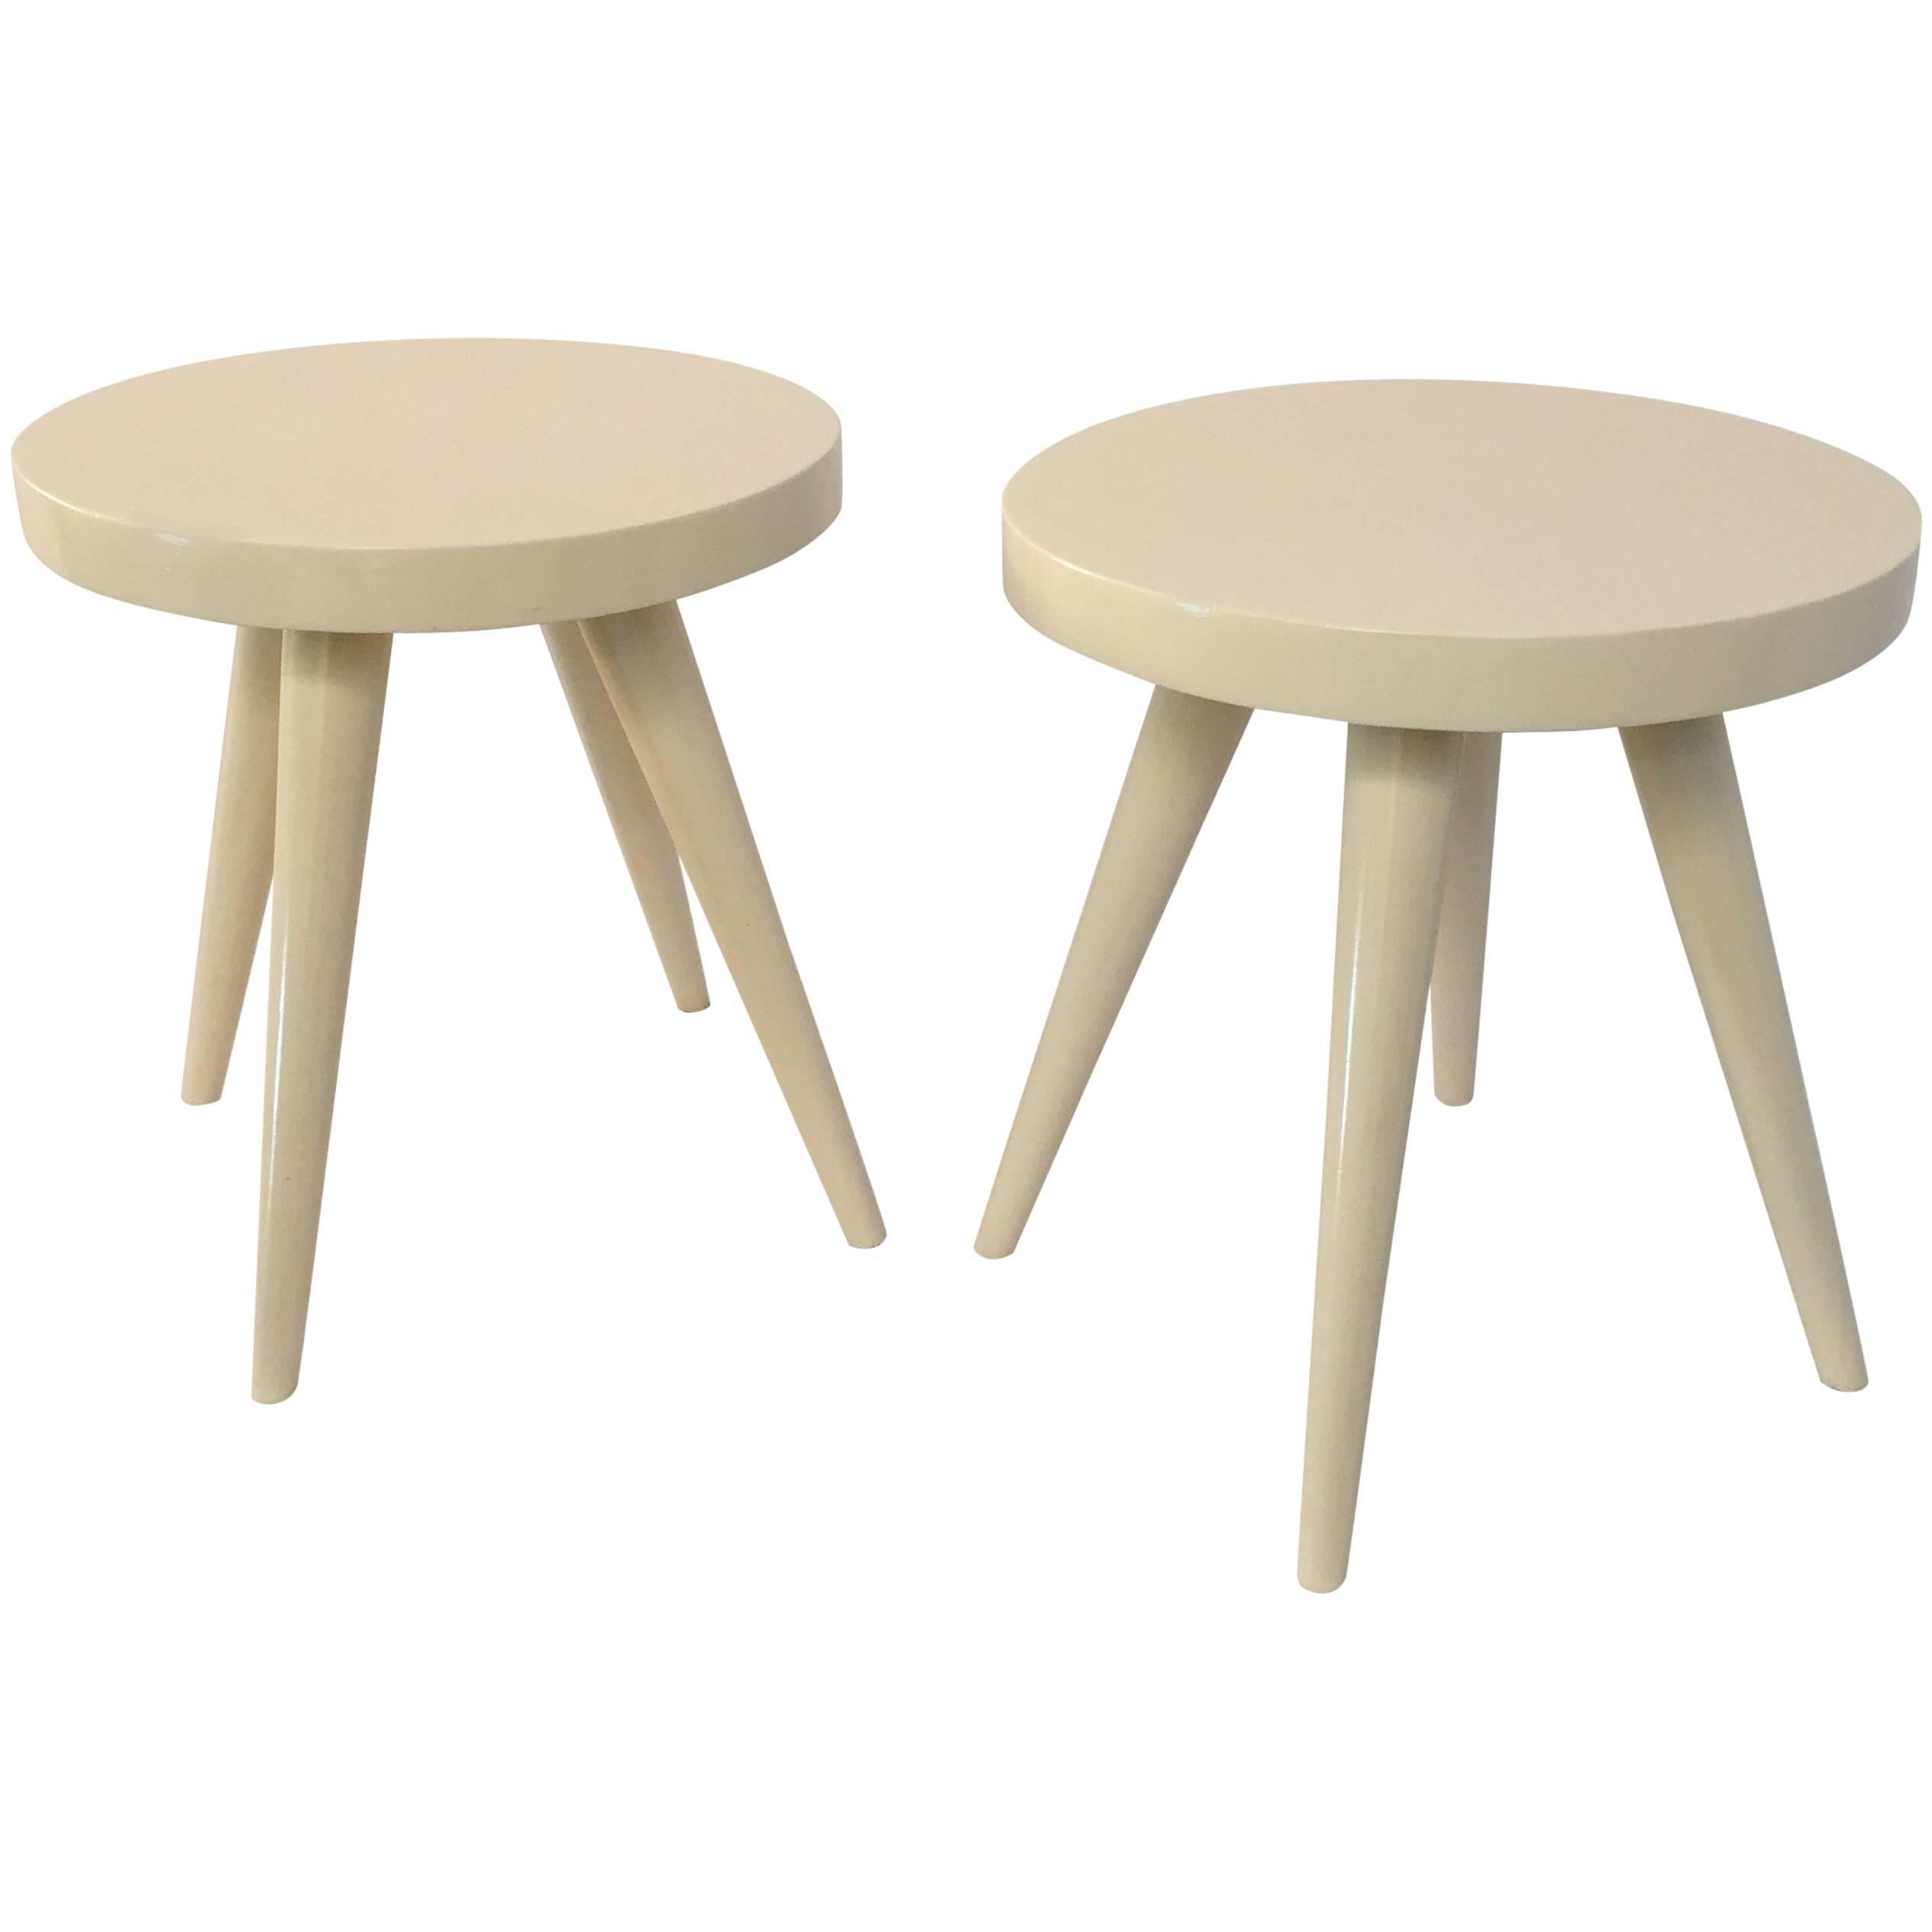 Pair of Modern White Lacquered Stools in the Manner of Charlotte Perriand